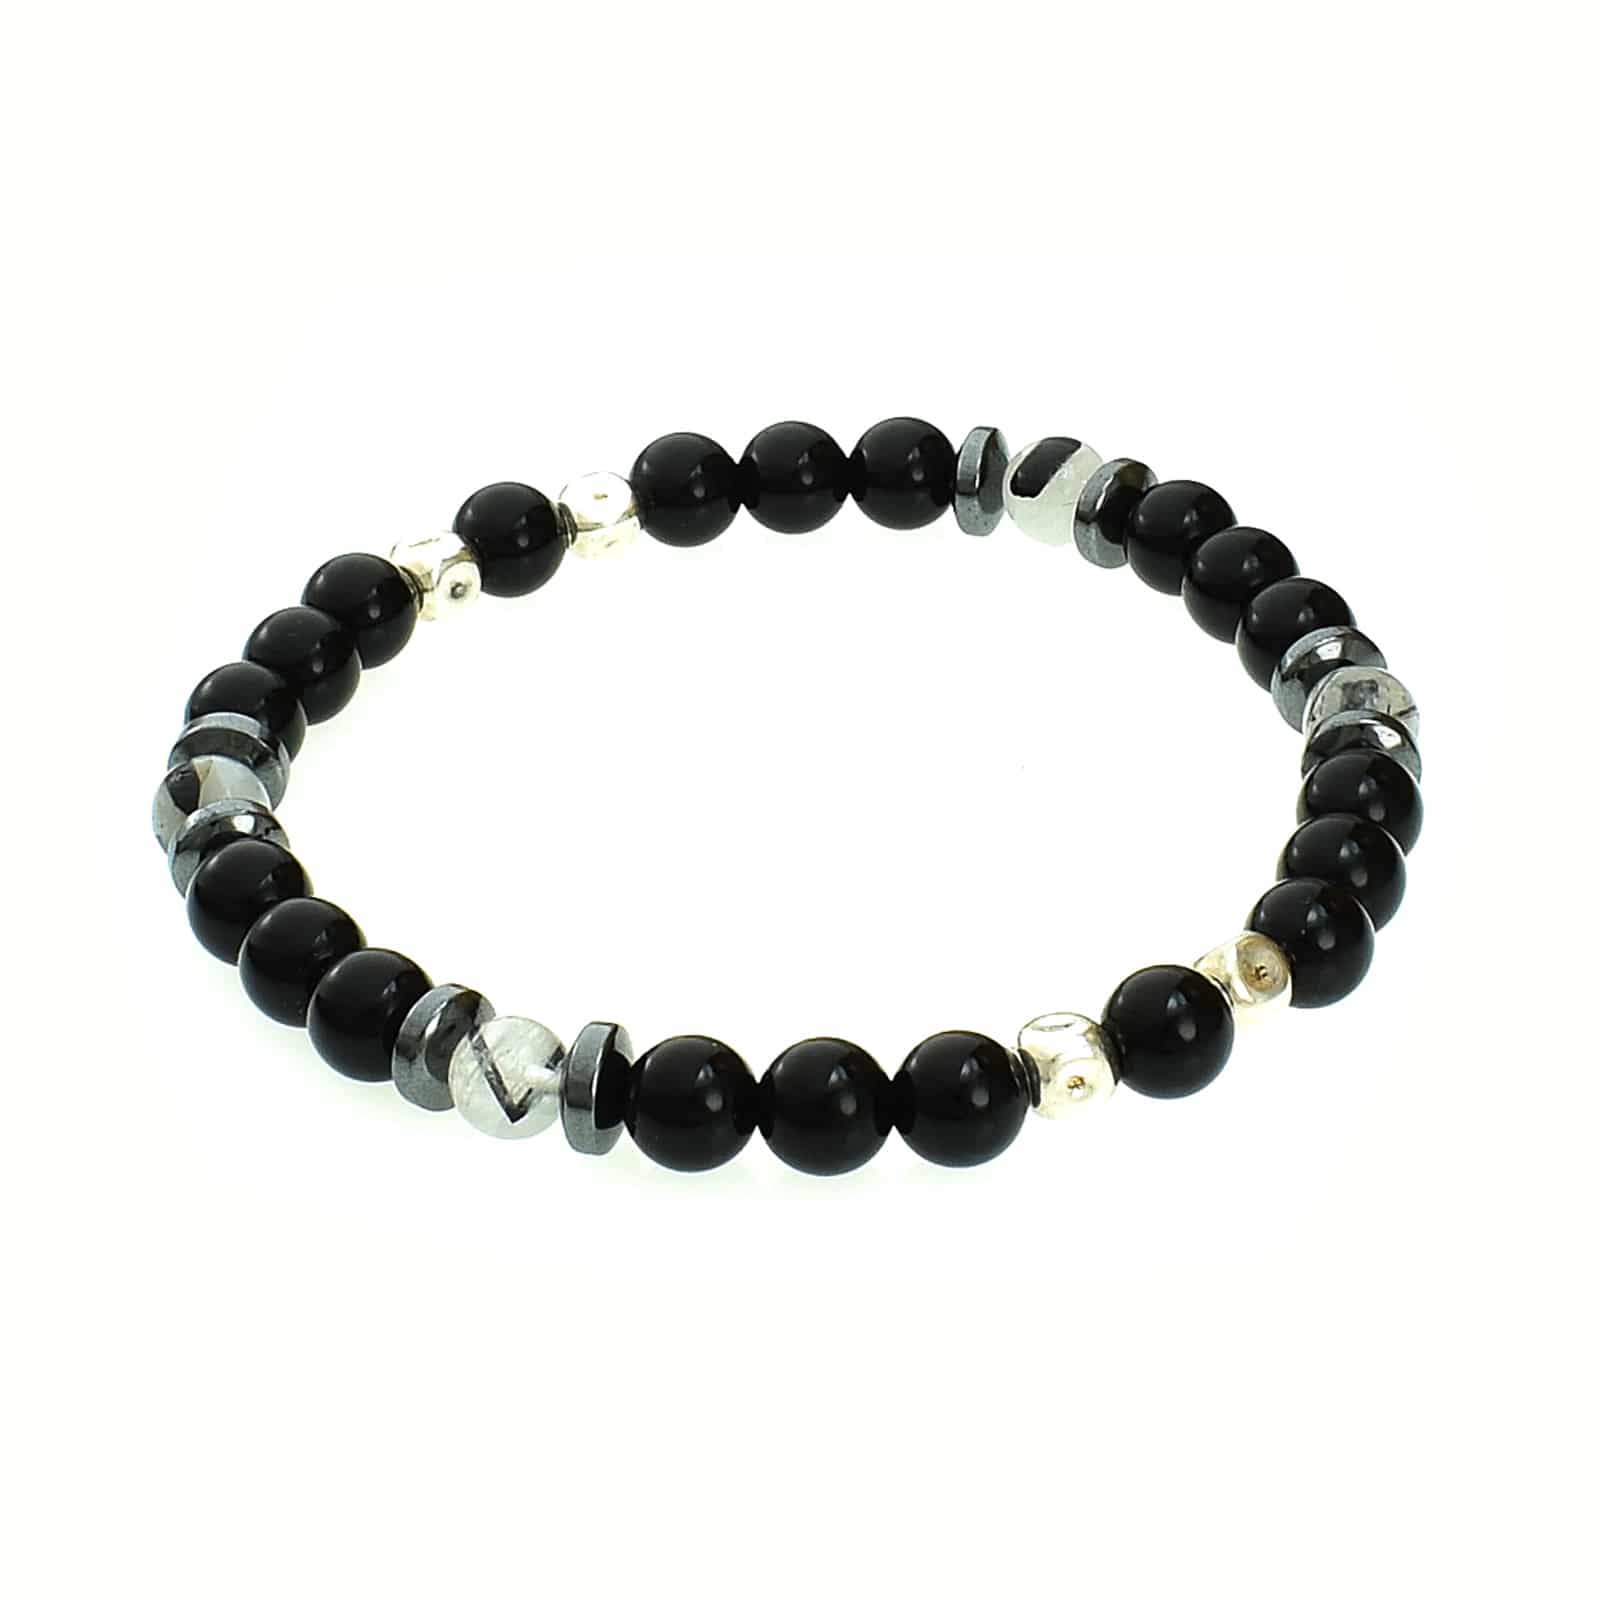 Handmade bracelet with Onyx, Crystal Quartz with black Tourmaline and Hematite, threaded with special elastic. The bracelet is decorated with elements made of sterling silver. Buy online shop.